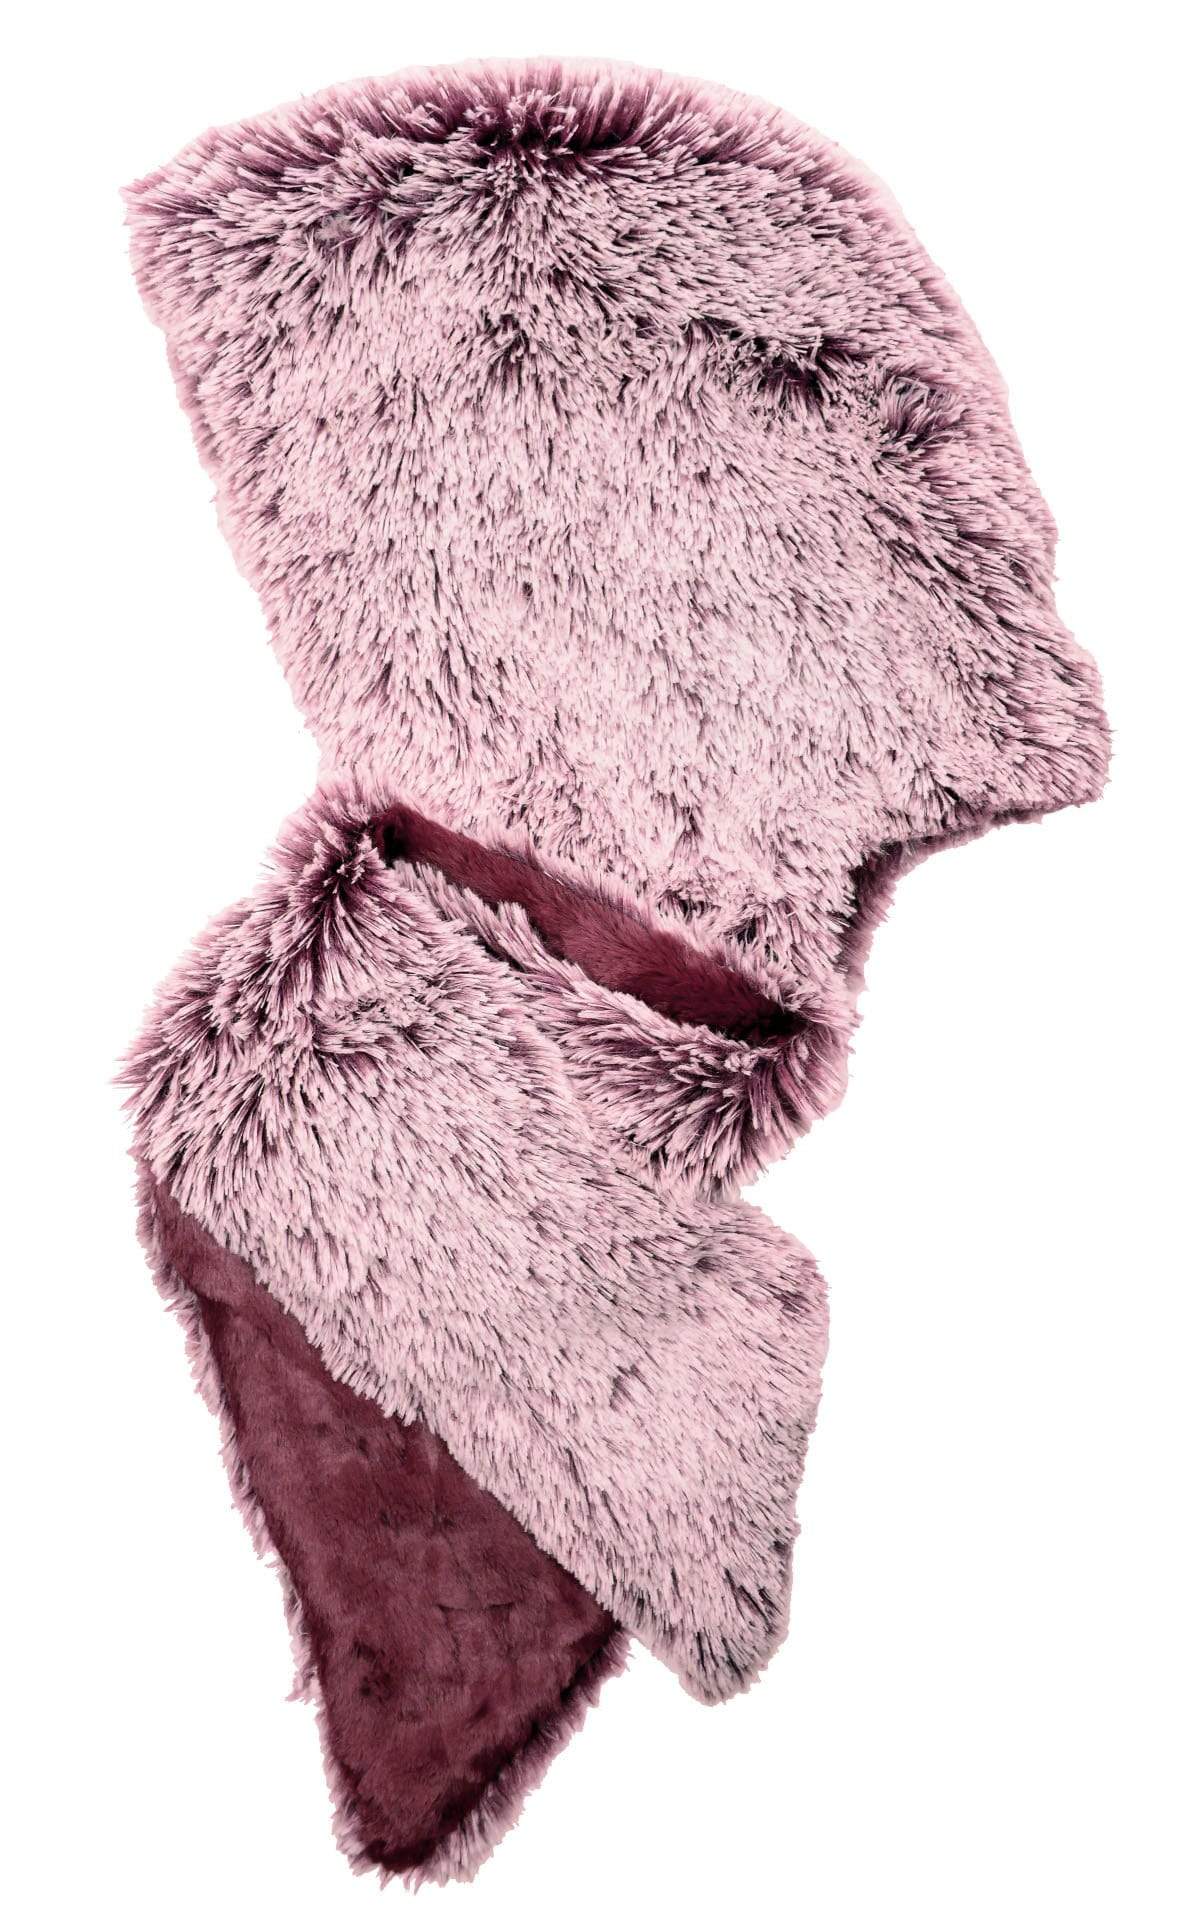 Pandemonium Millinery Hoody Scarf - Berry Foxy Faux Fur with Cuddly Fur Scarves